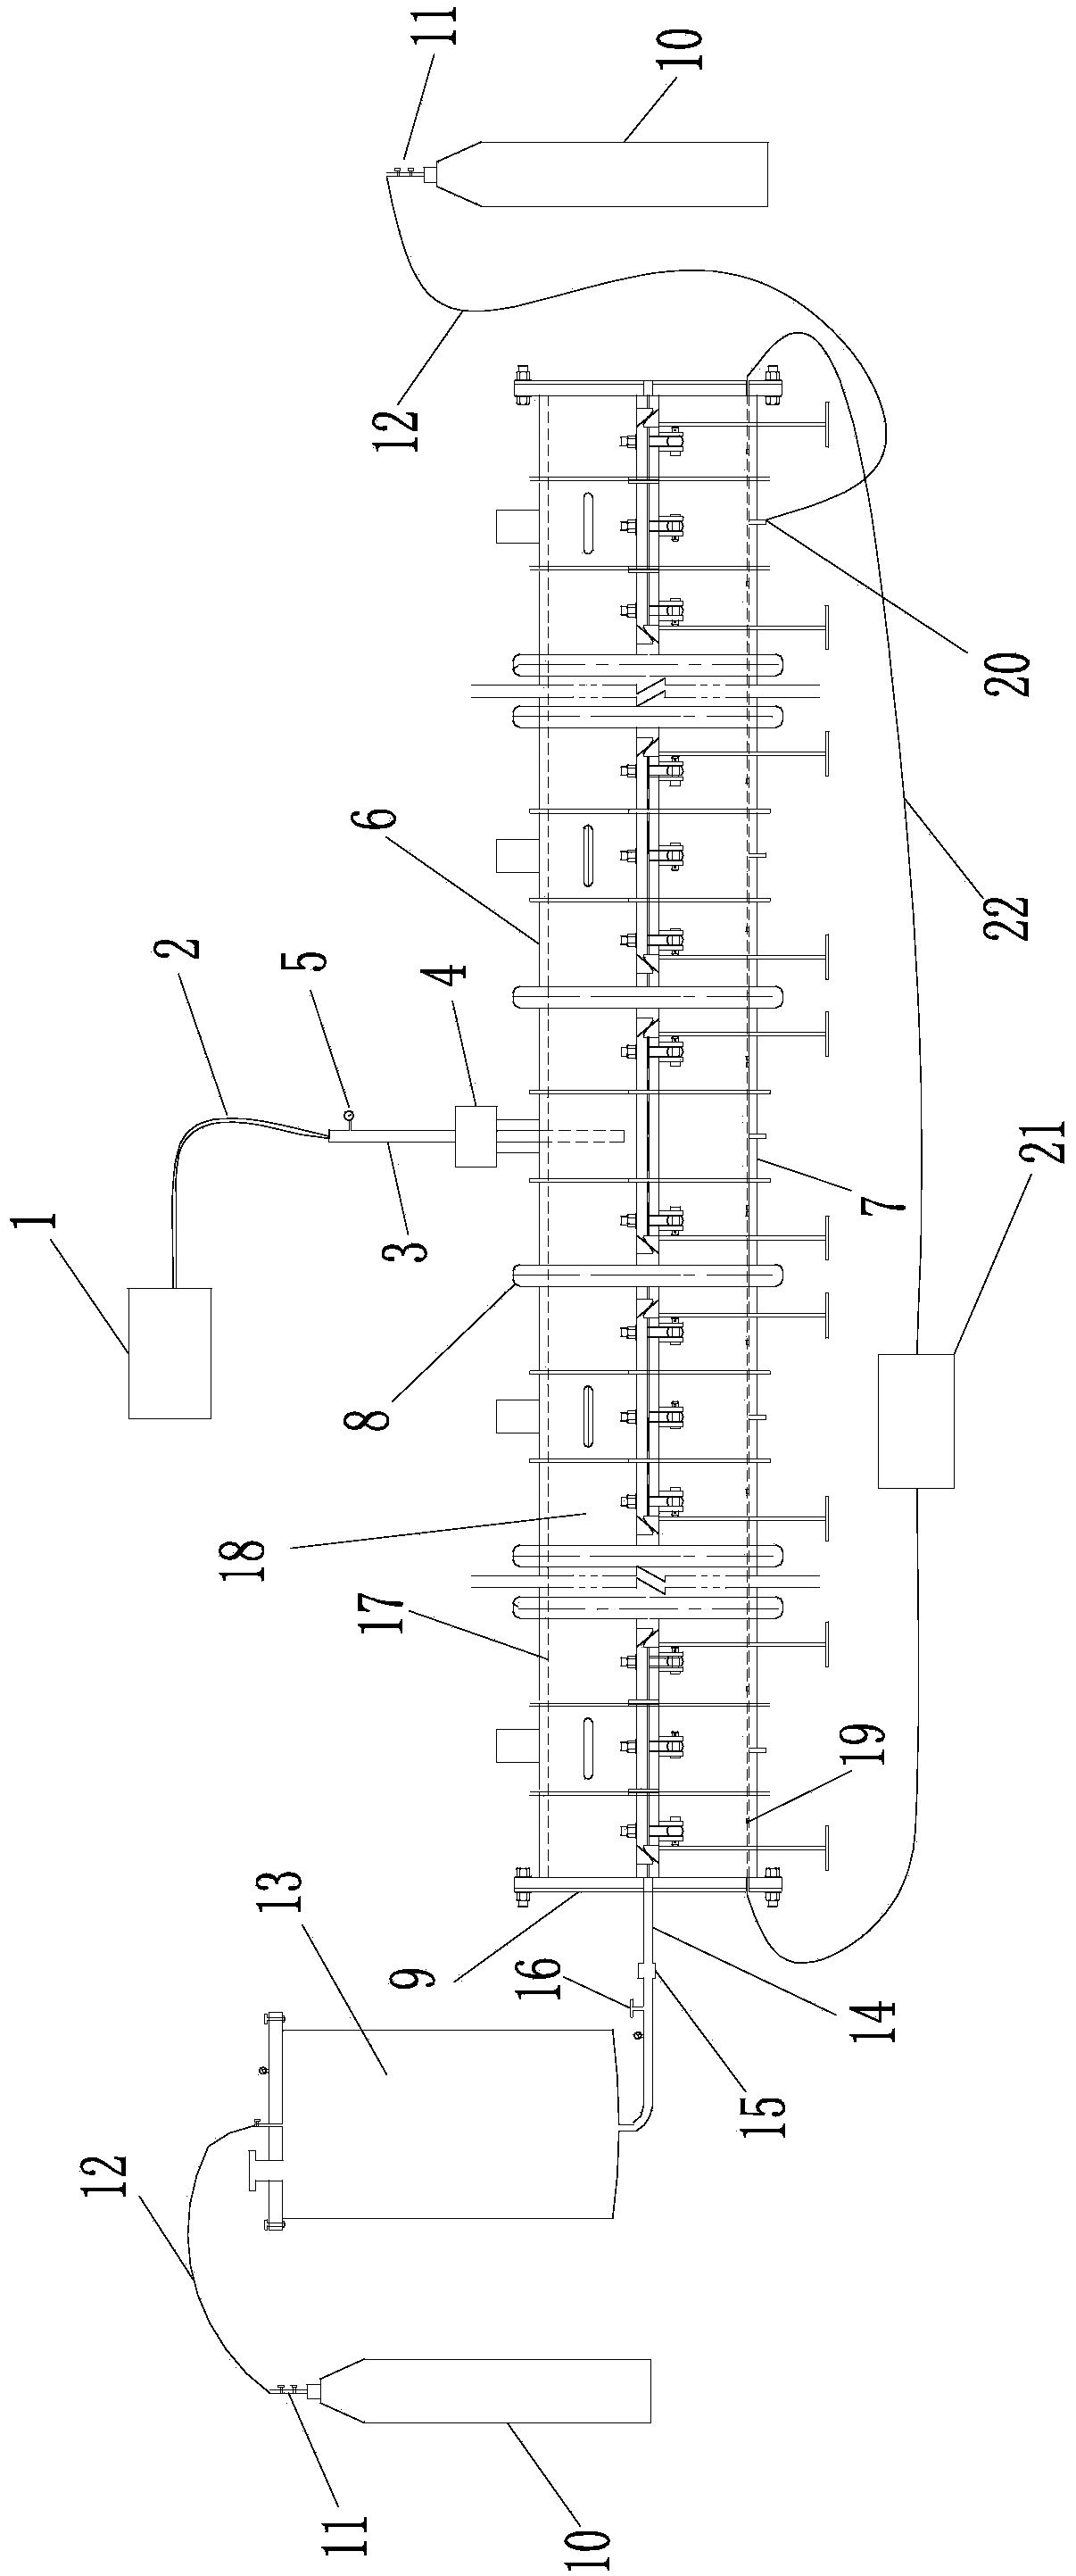 Unconsolidated formation grouting experimental device